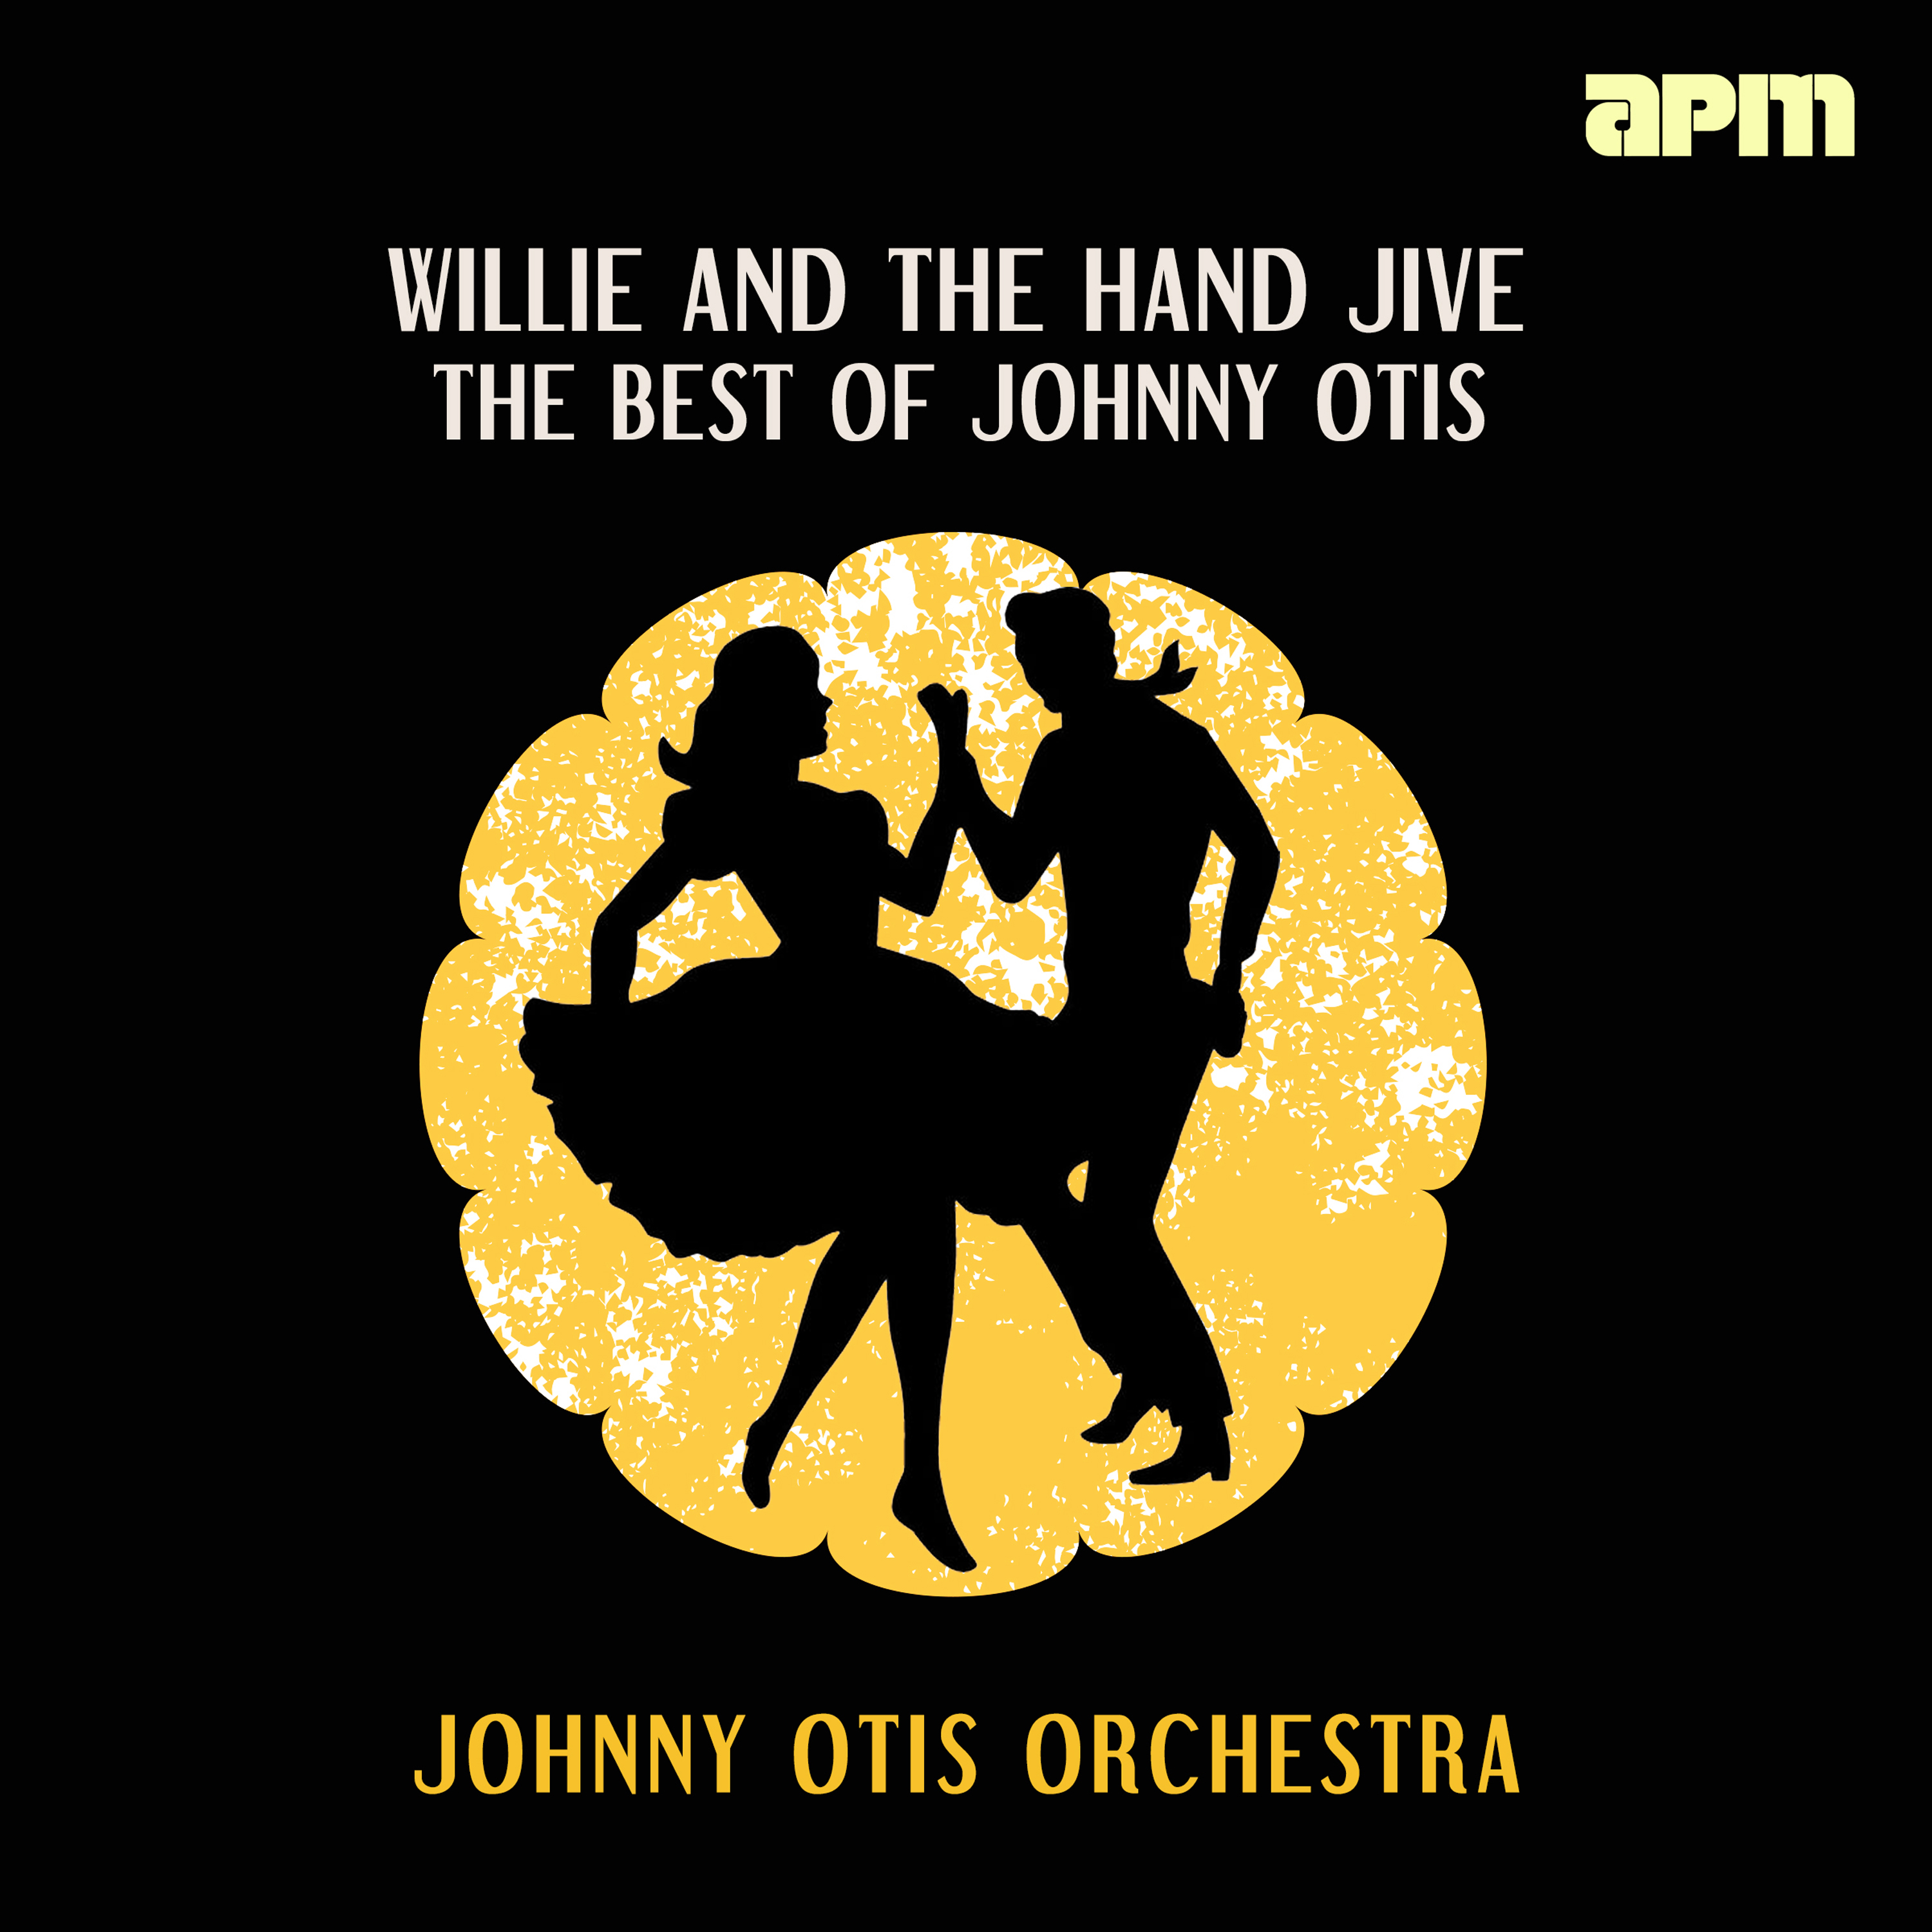 Willie and the Hand Jive - The Best of Johnny Otis